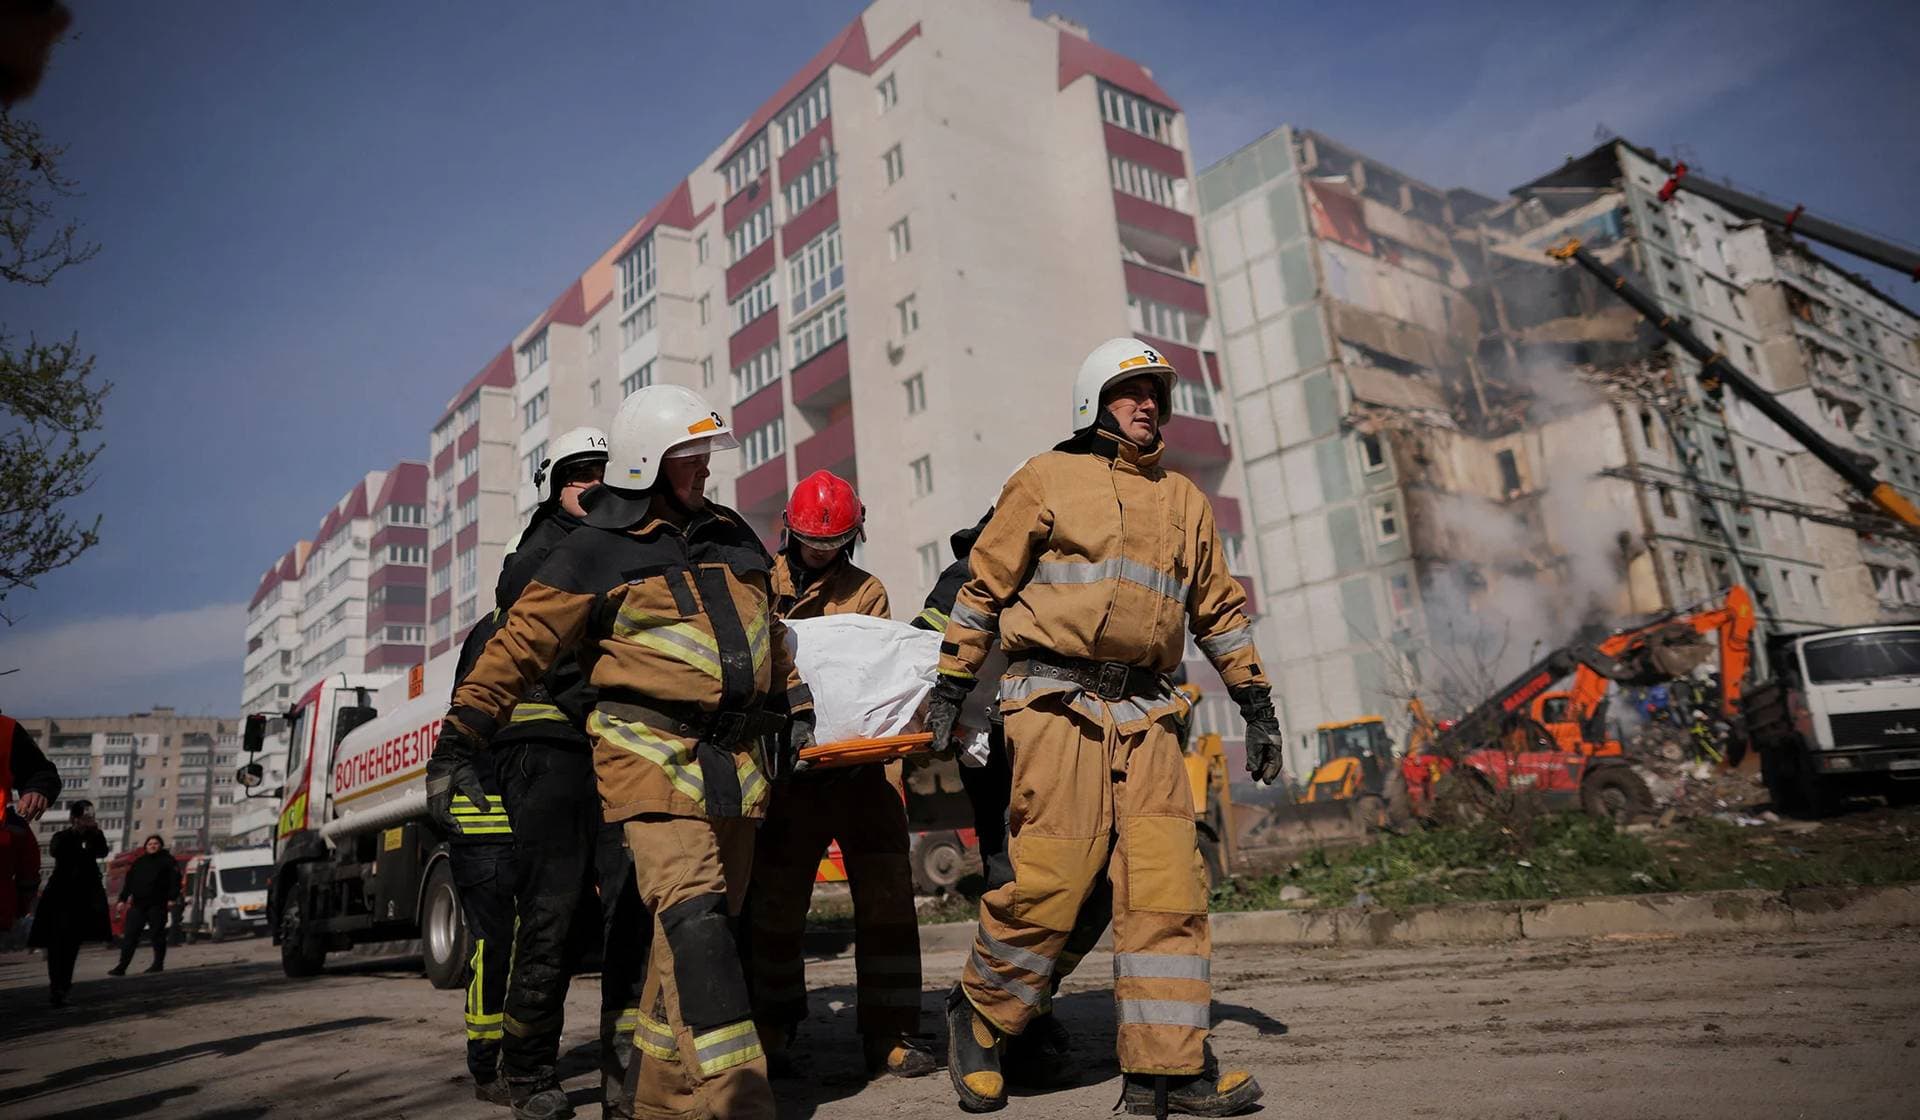 Rescuers carry a body covered with a bag as they work at the site of a heavily damaged residential building hit by a Russian missile in Uman